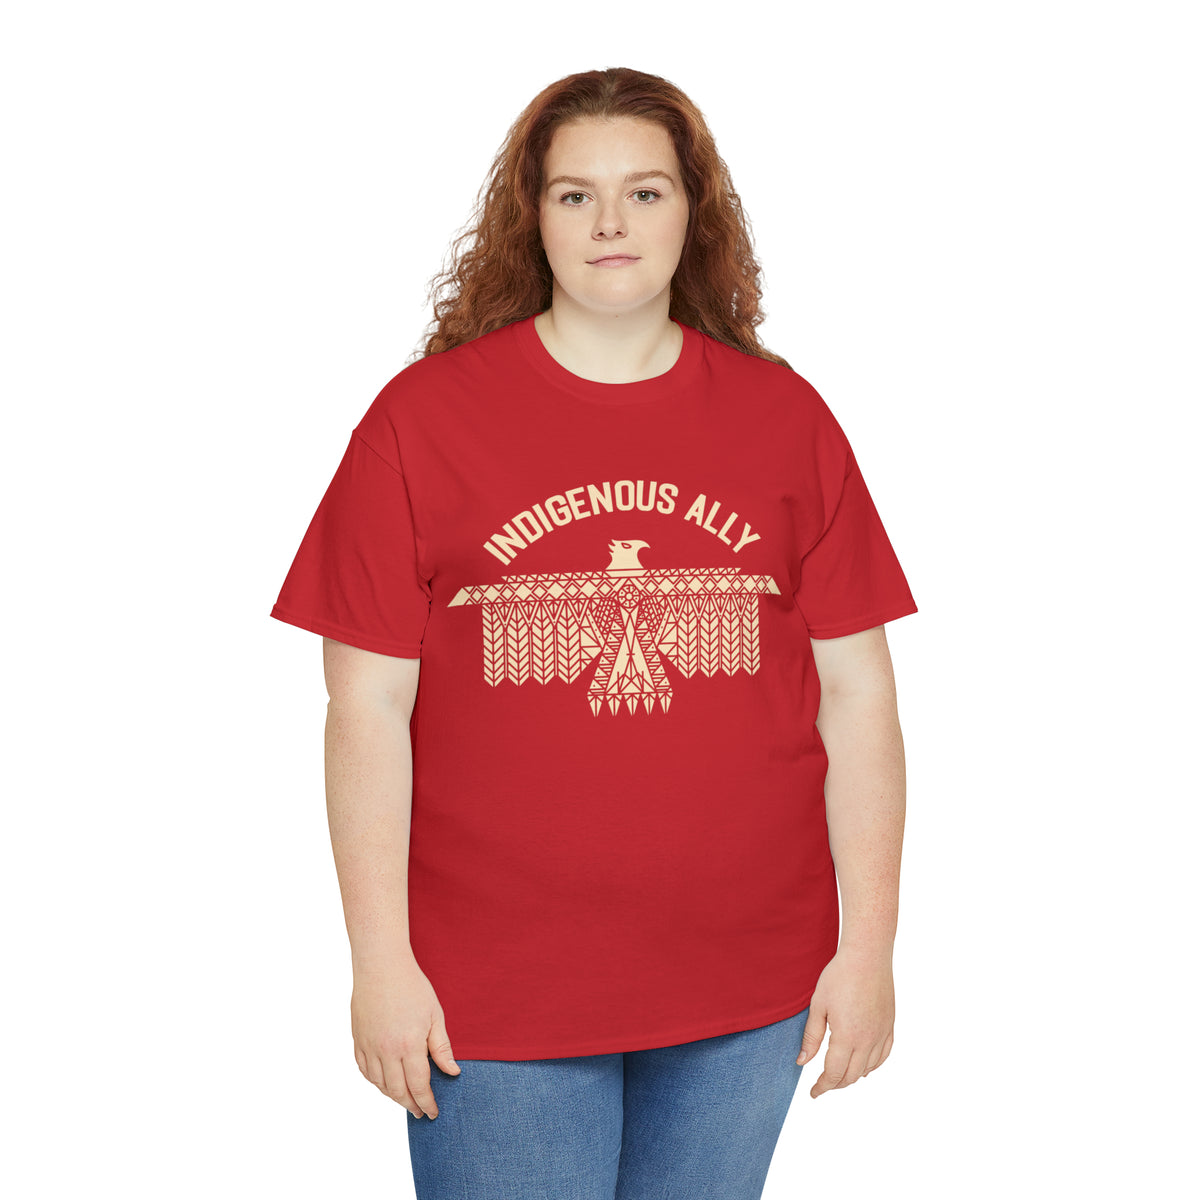 Indigenous Ally T-Shirt